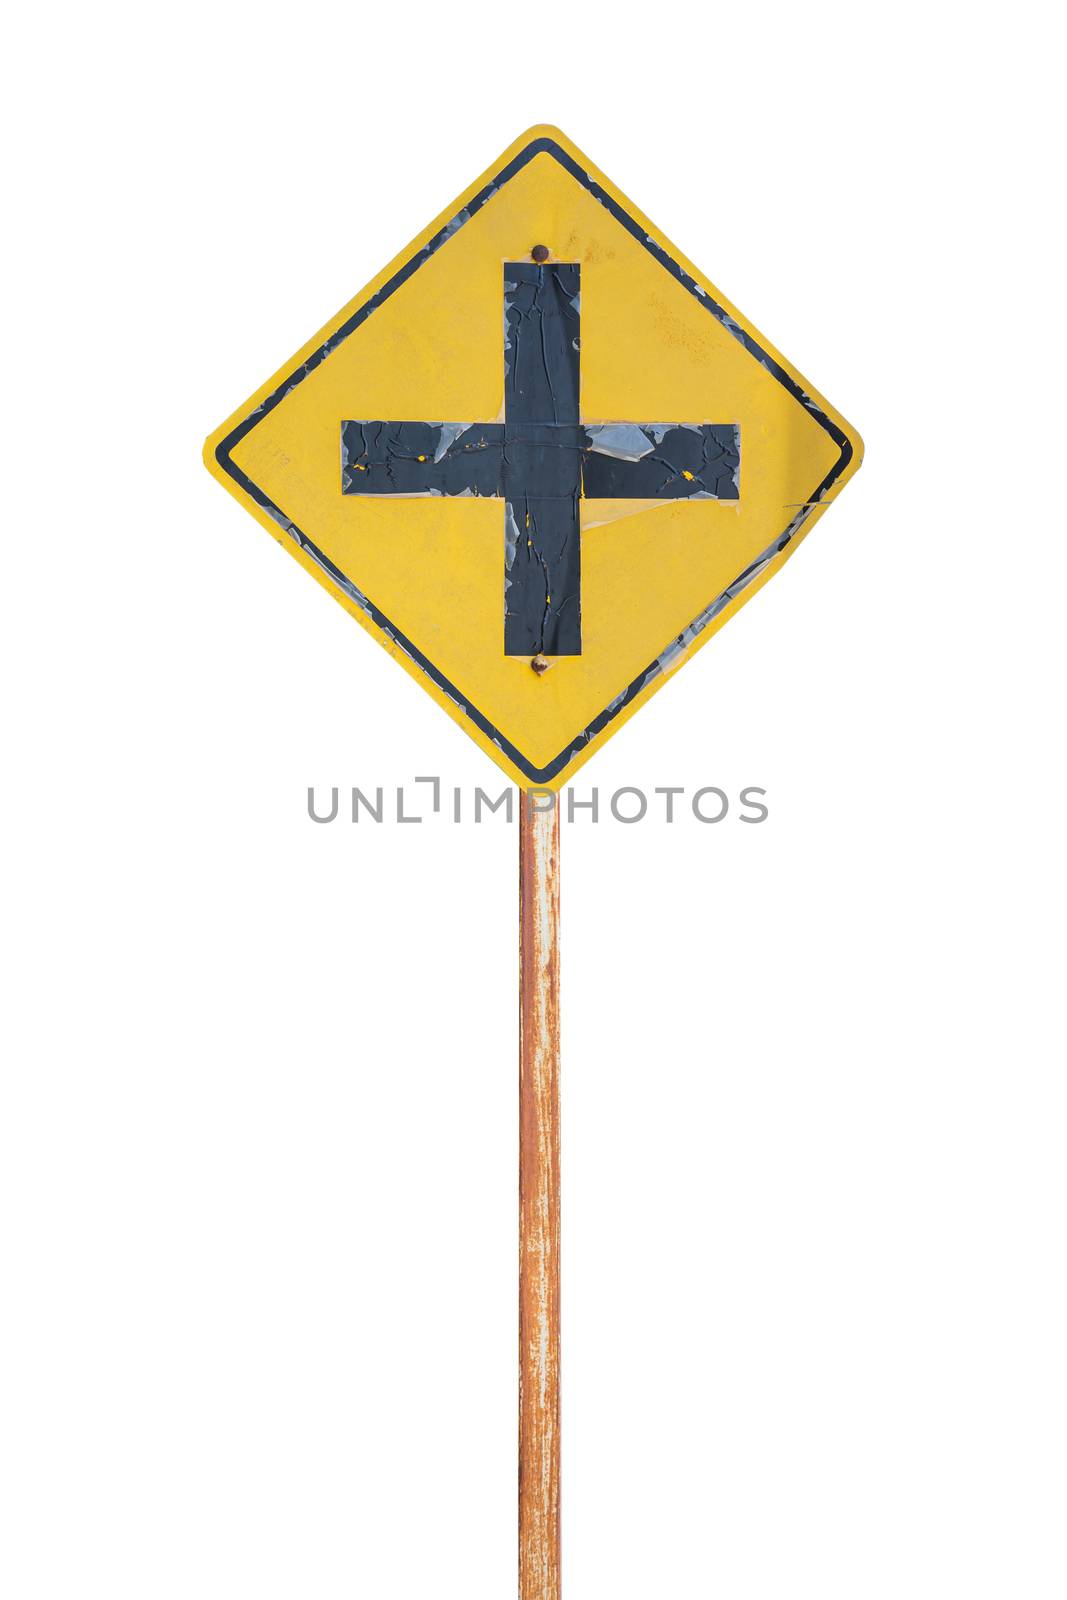 Old Intersection ahead road sign isolated on white background by powerbeephoto